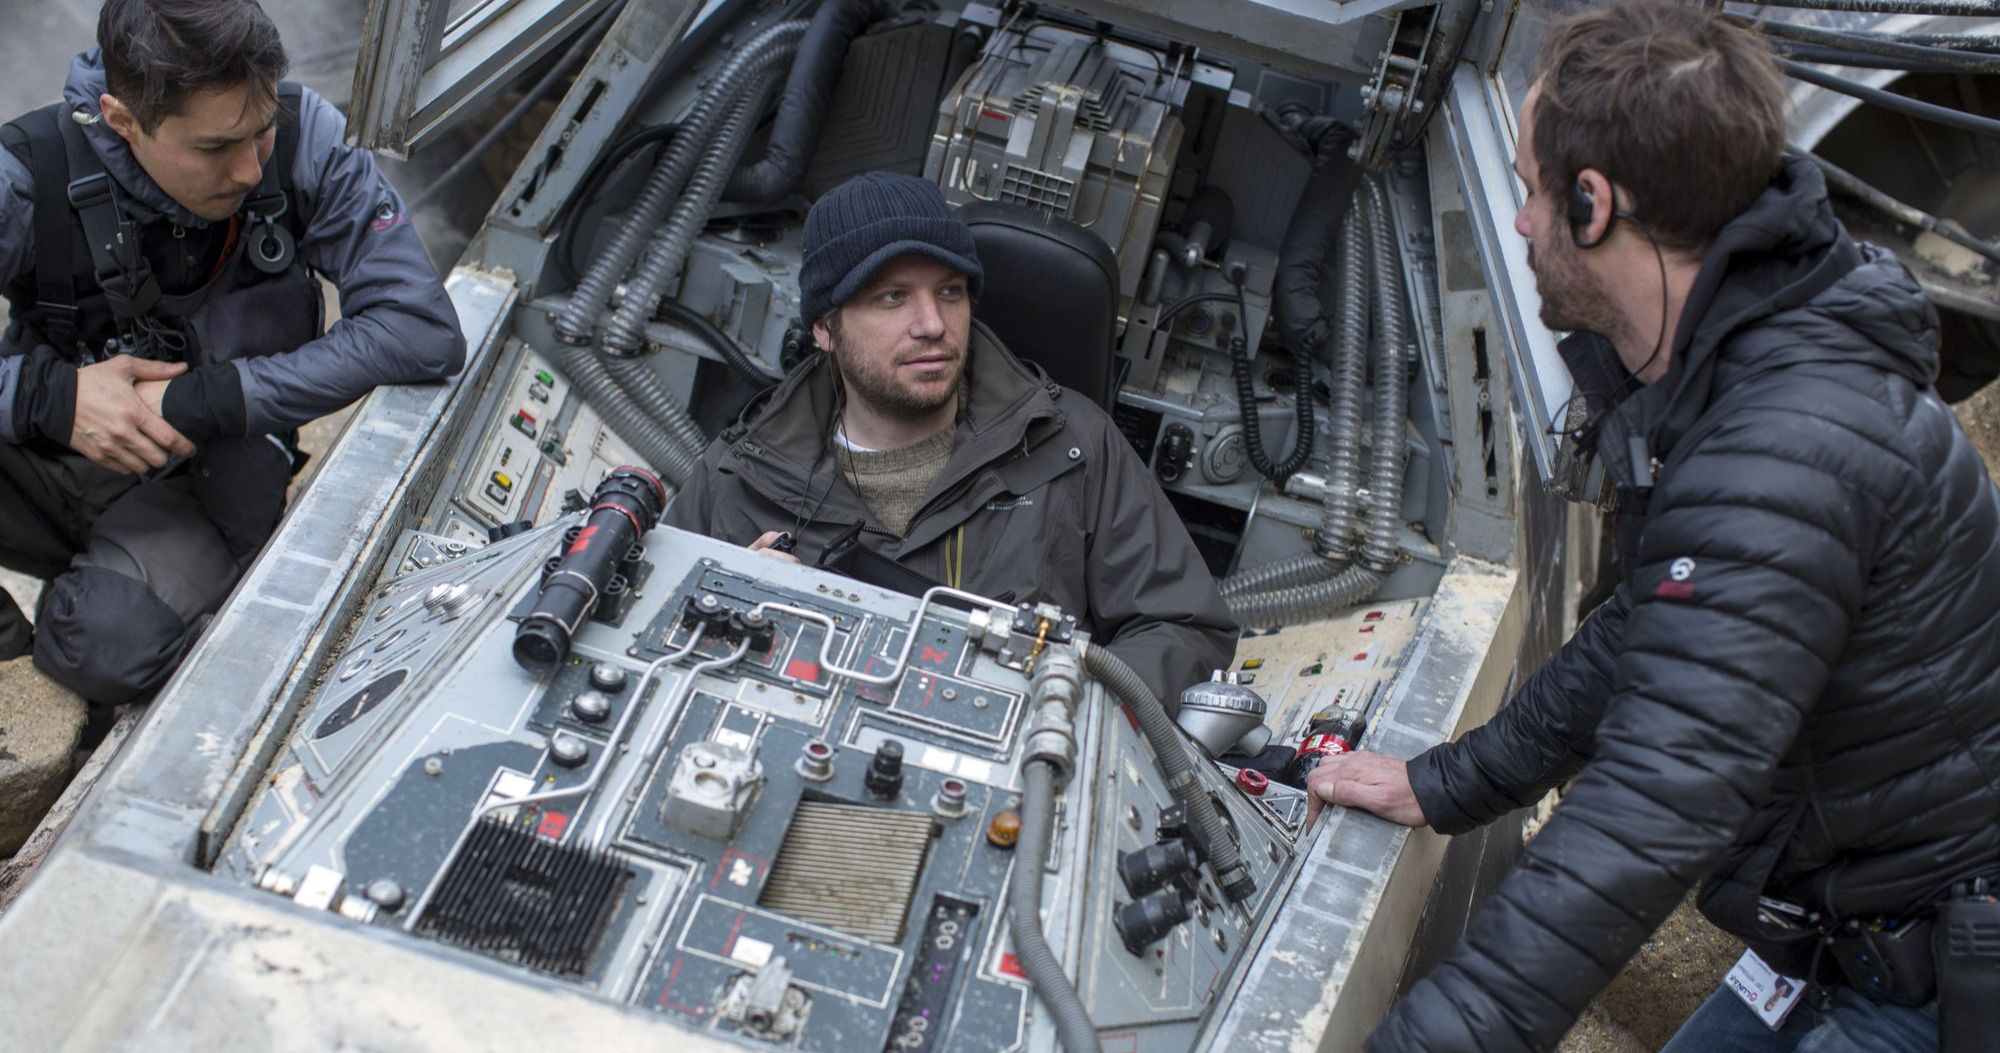 Rogue One Director Gareth Edwards Is Making a New Sci-Fi Movie